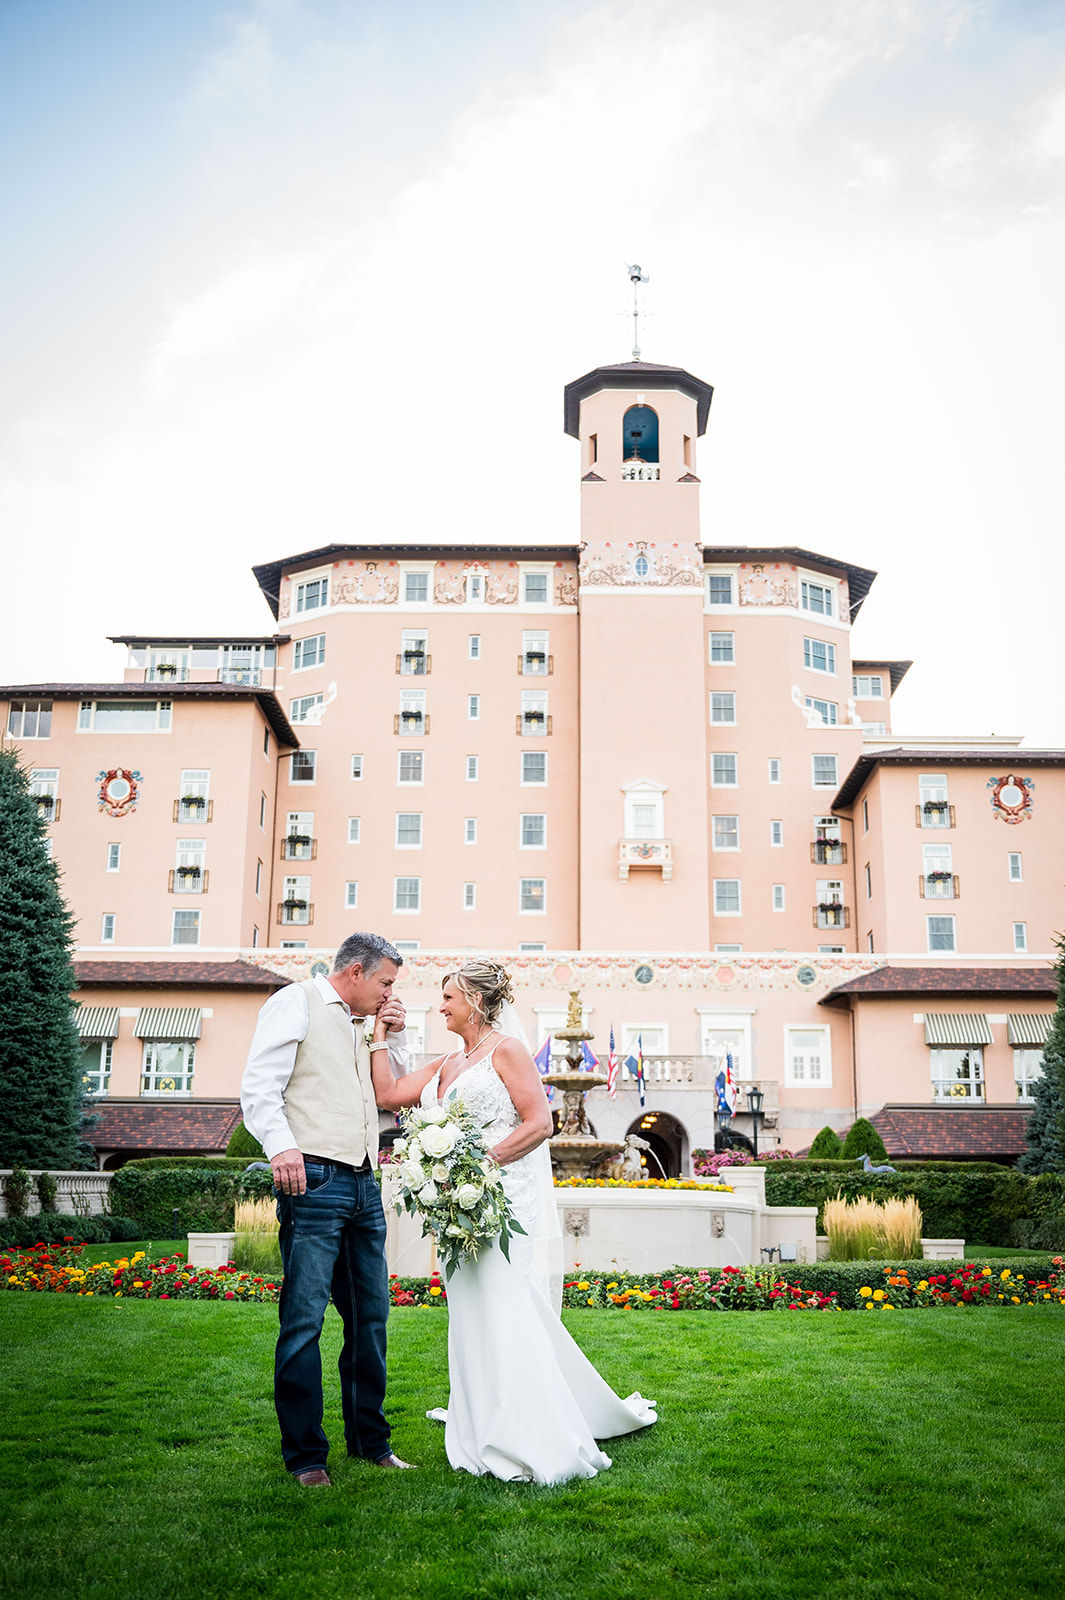 The groom kisses the bride's hand with the Broadmoor Hotel in the background.